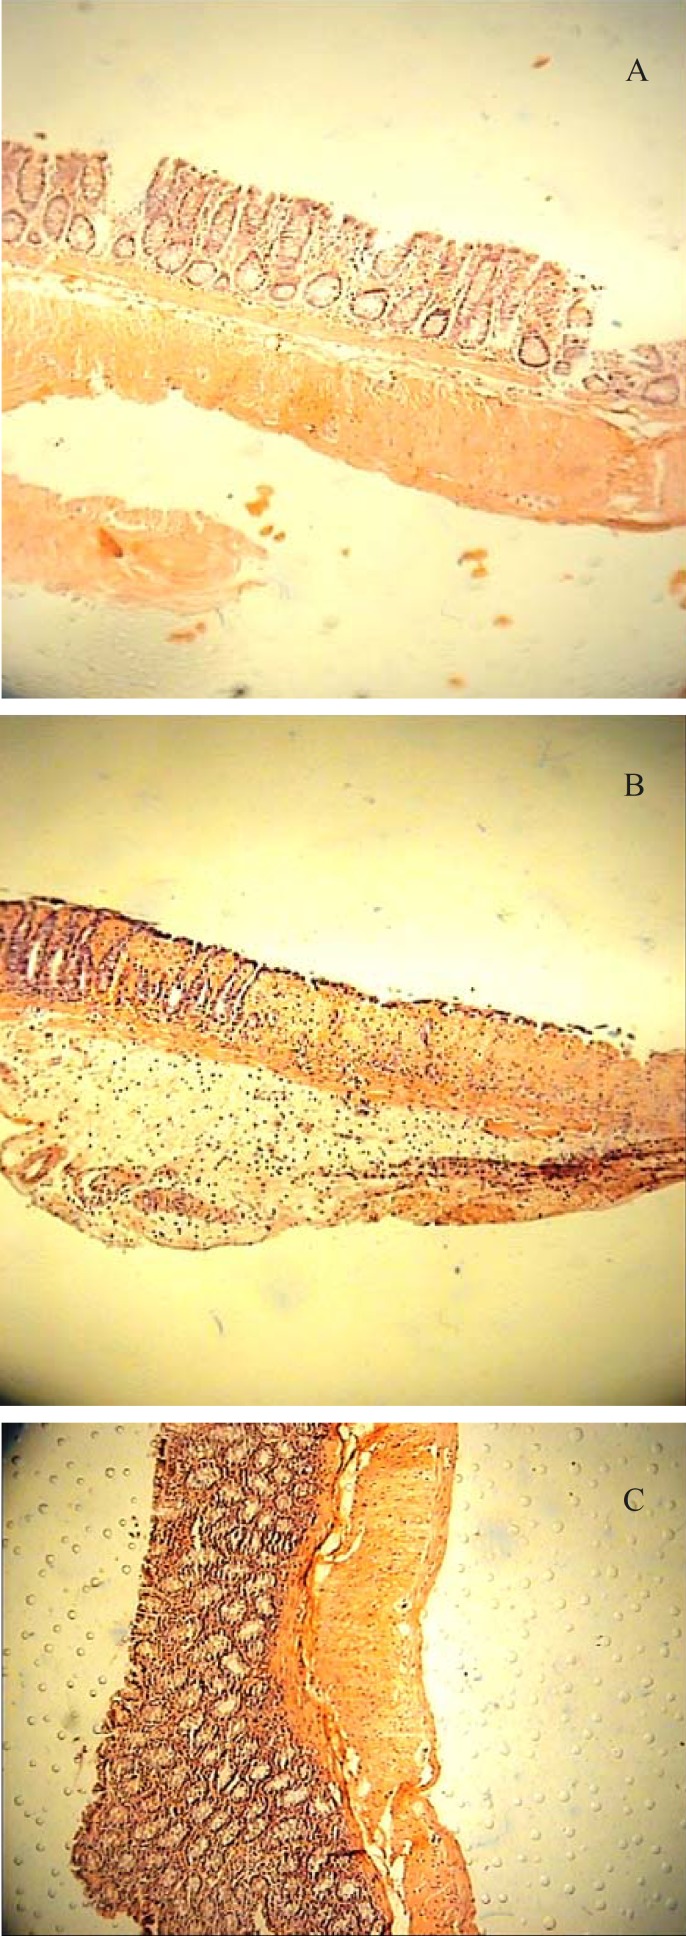 (A) Colitis induced by acetic acid in control rats. Erosion of surface epithelium, destruction of crypts and transmural hyperemia, edema and acute inflammation is evident (H&E section, low power). (B) Acetic acid-induced colitis treated with BFE (1500 mg/Kg); the mononuclear cell infiltrate of the lamina propria is much diminished but there is slight edema separating the crypts. All signs of acute inflammation have disappeared (H&E section, low power). (C) Acetic acid colitis treated with prednisolone (5 mg/Kg); the inflammation and crypt injury have been subsided significantly (H&E section, low power).